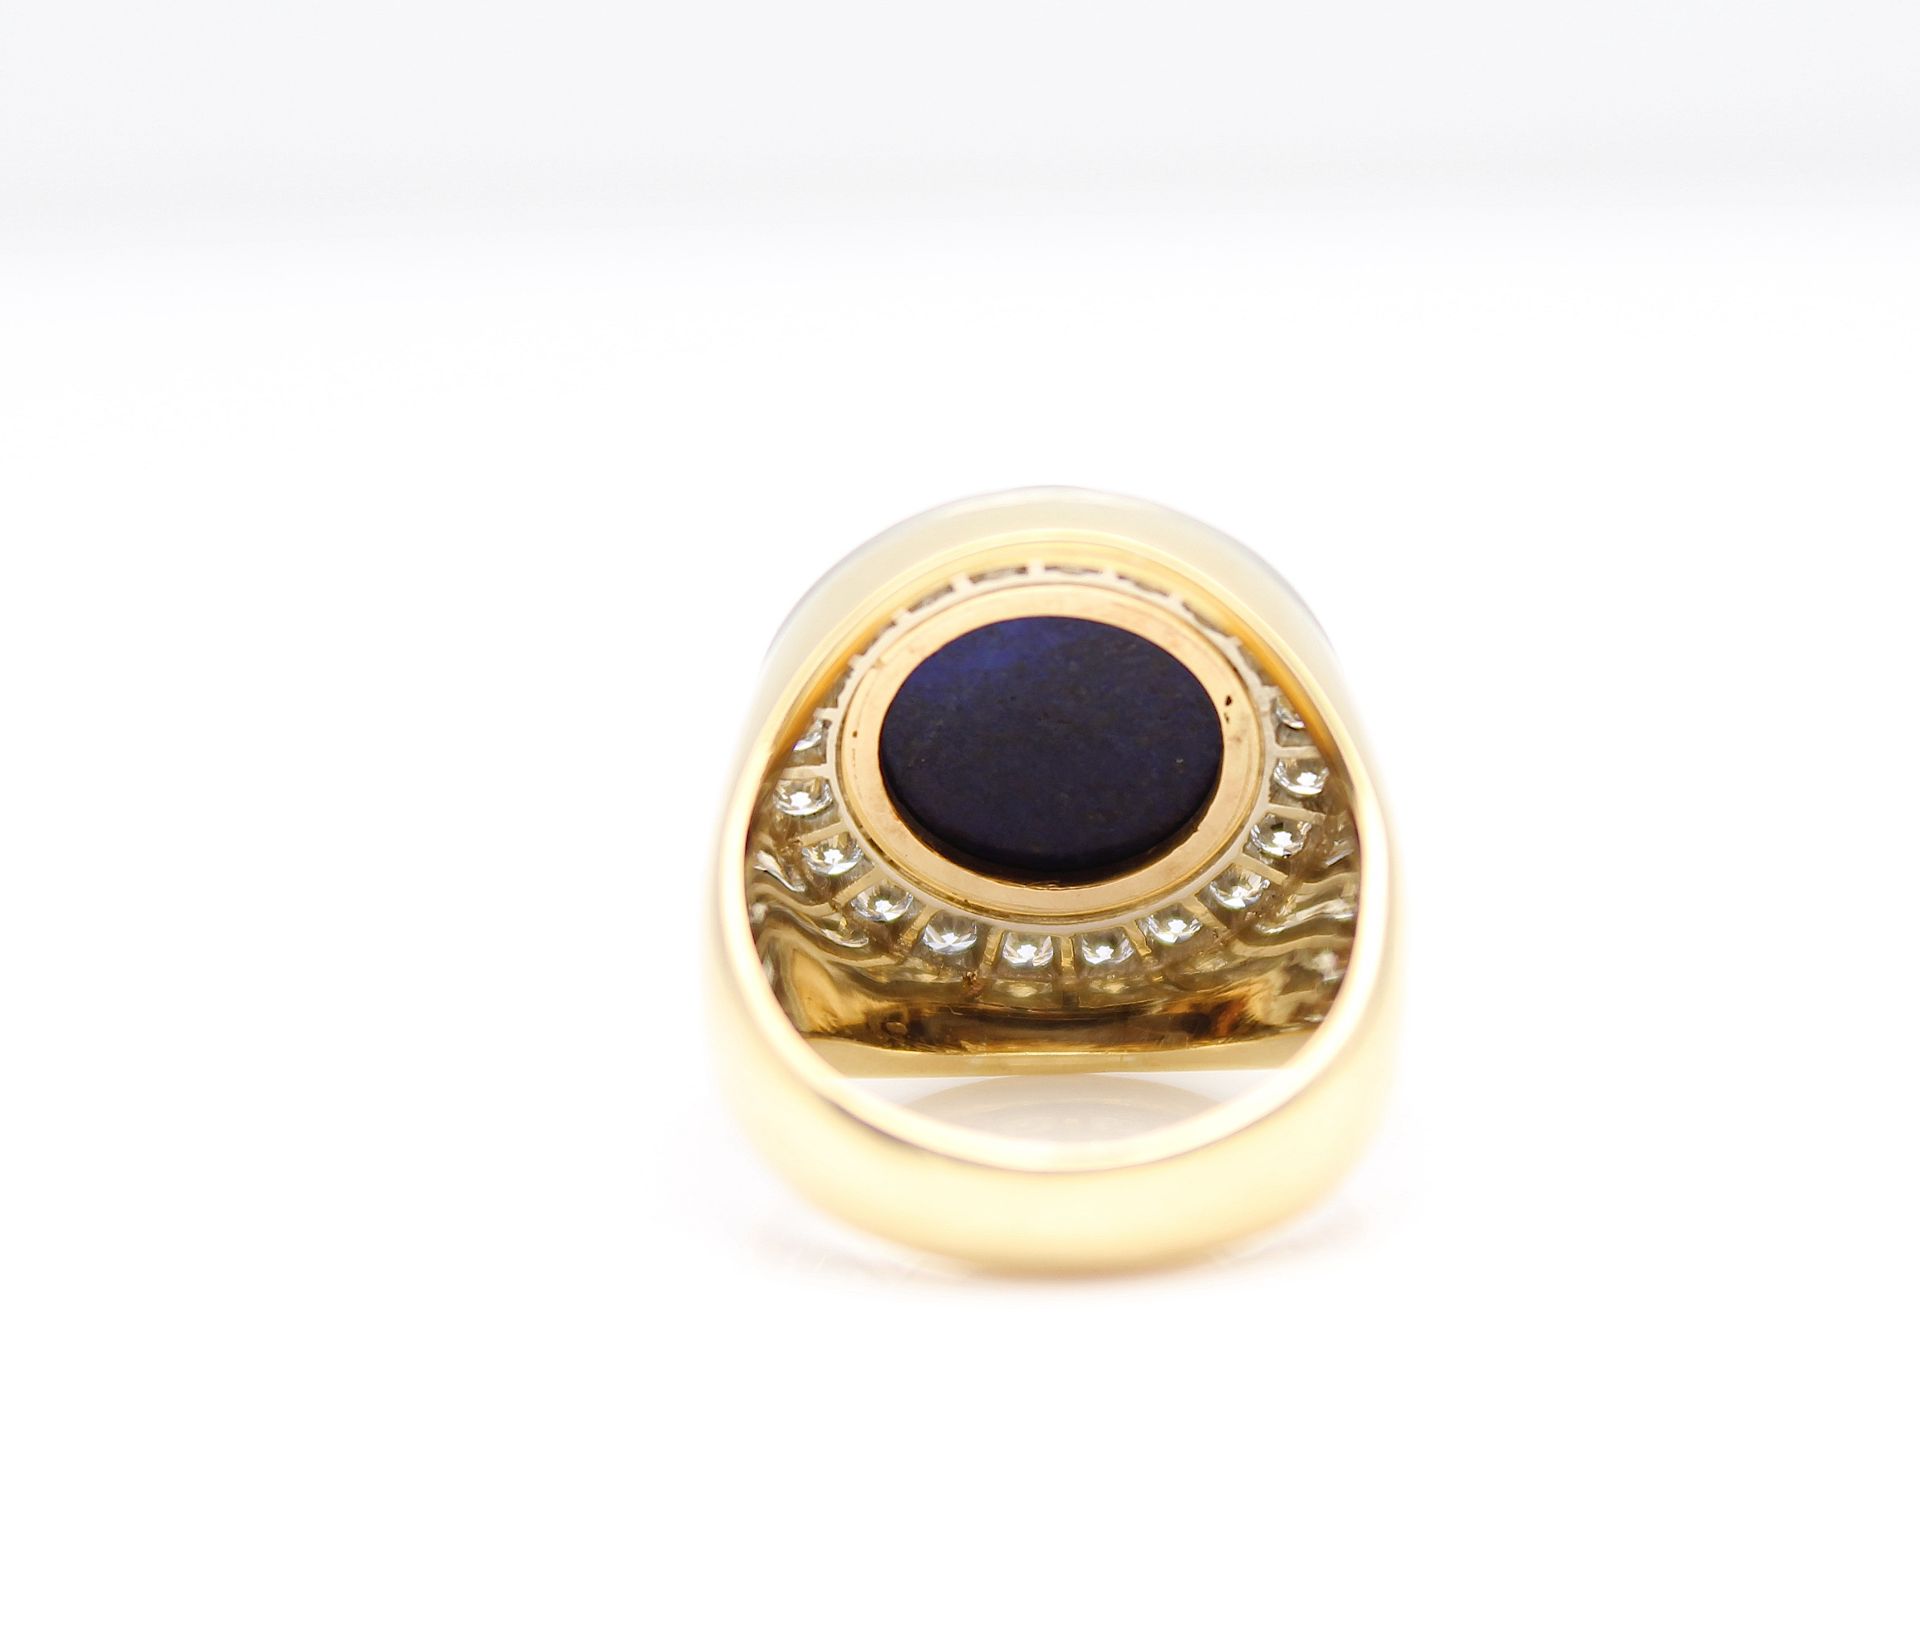 Exclusive ring from Vienna with lapis lazuli and brilliants - Image 5 of 5